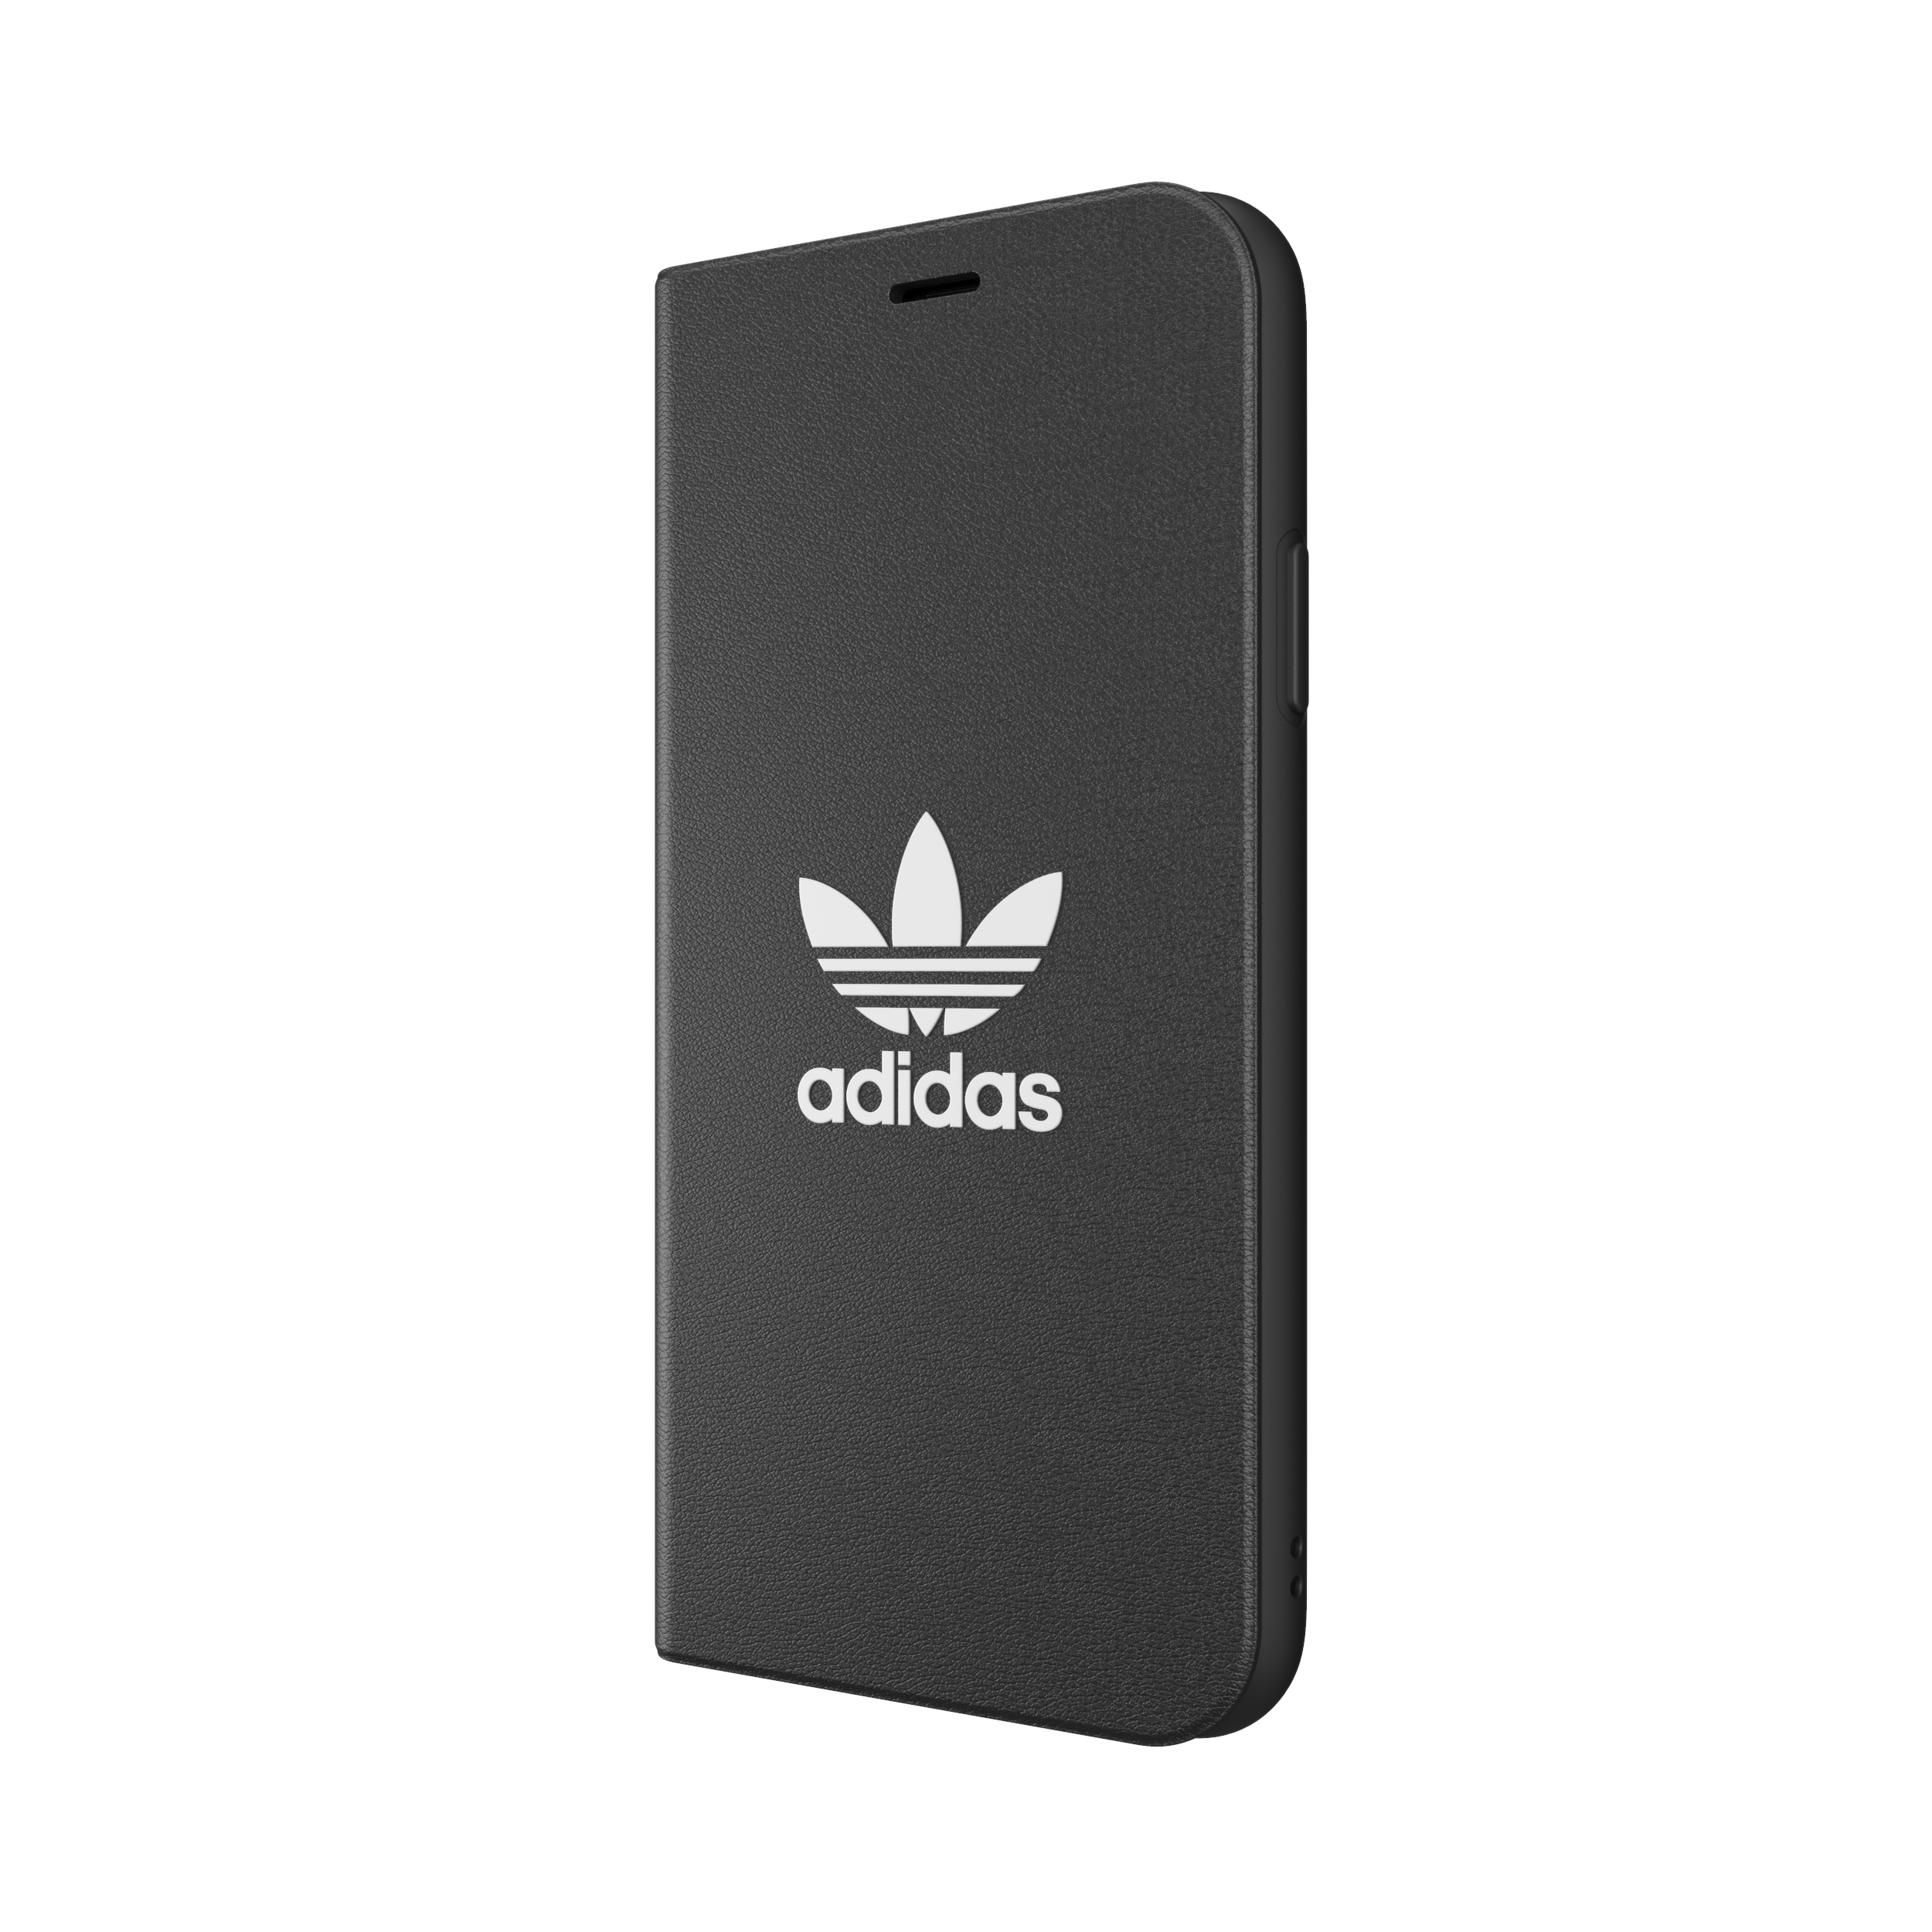 MAX, ADIDAS PRO APPLE, Booklet 11 BLACK Bookcover, IPHONE BASIC, Case